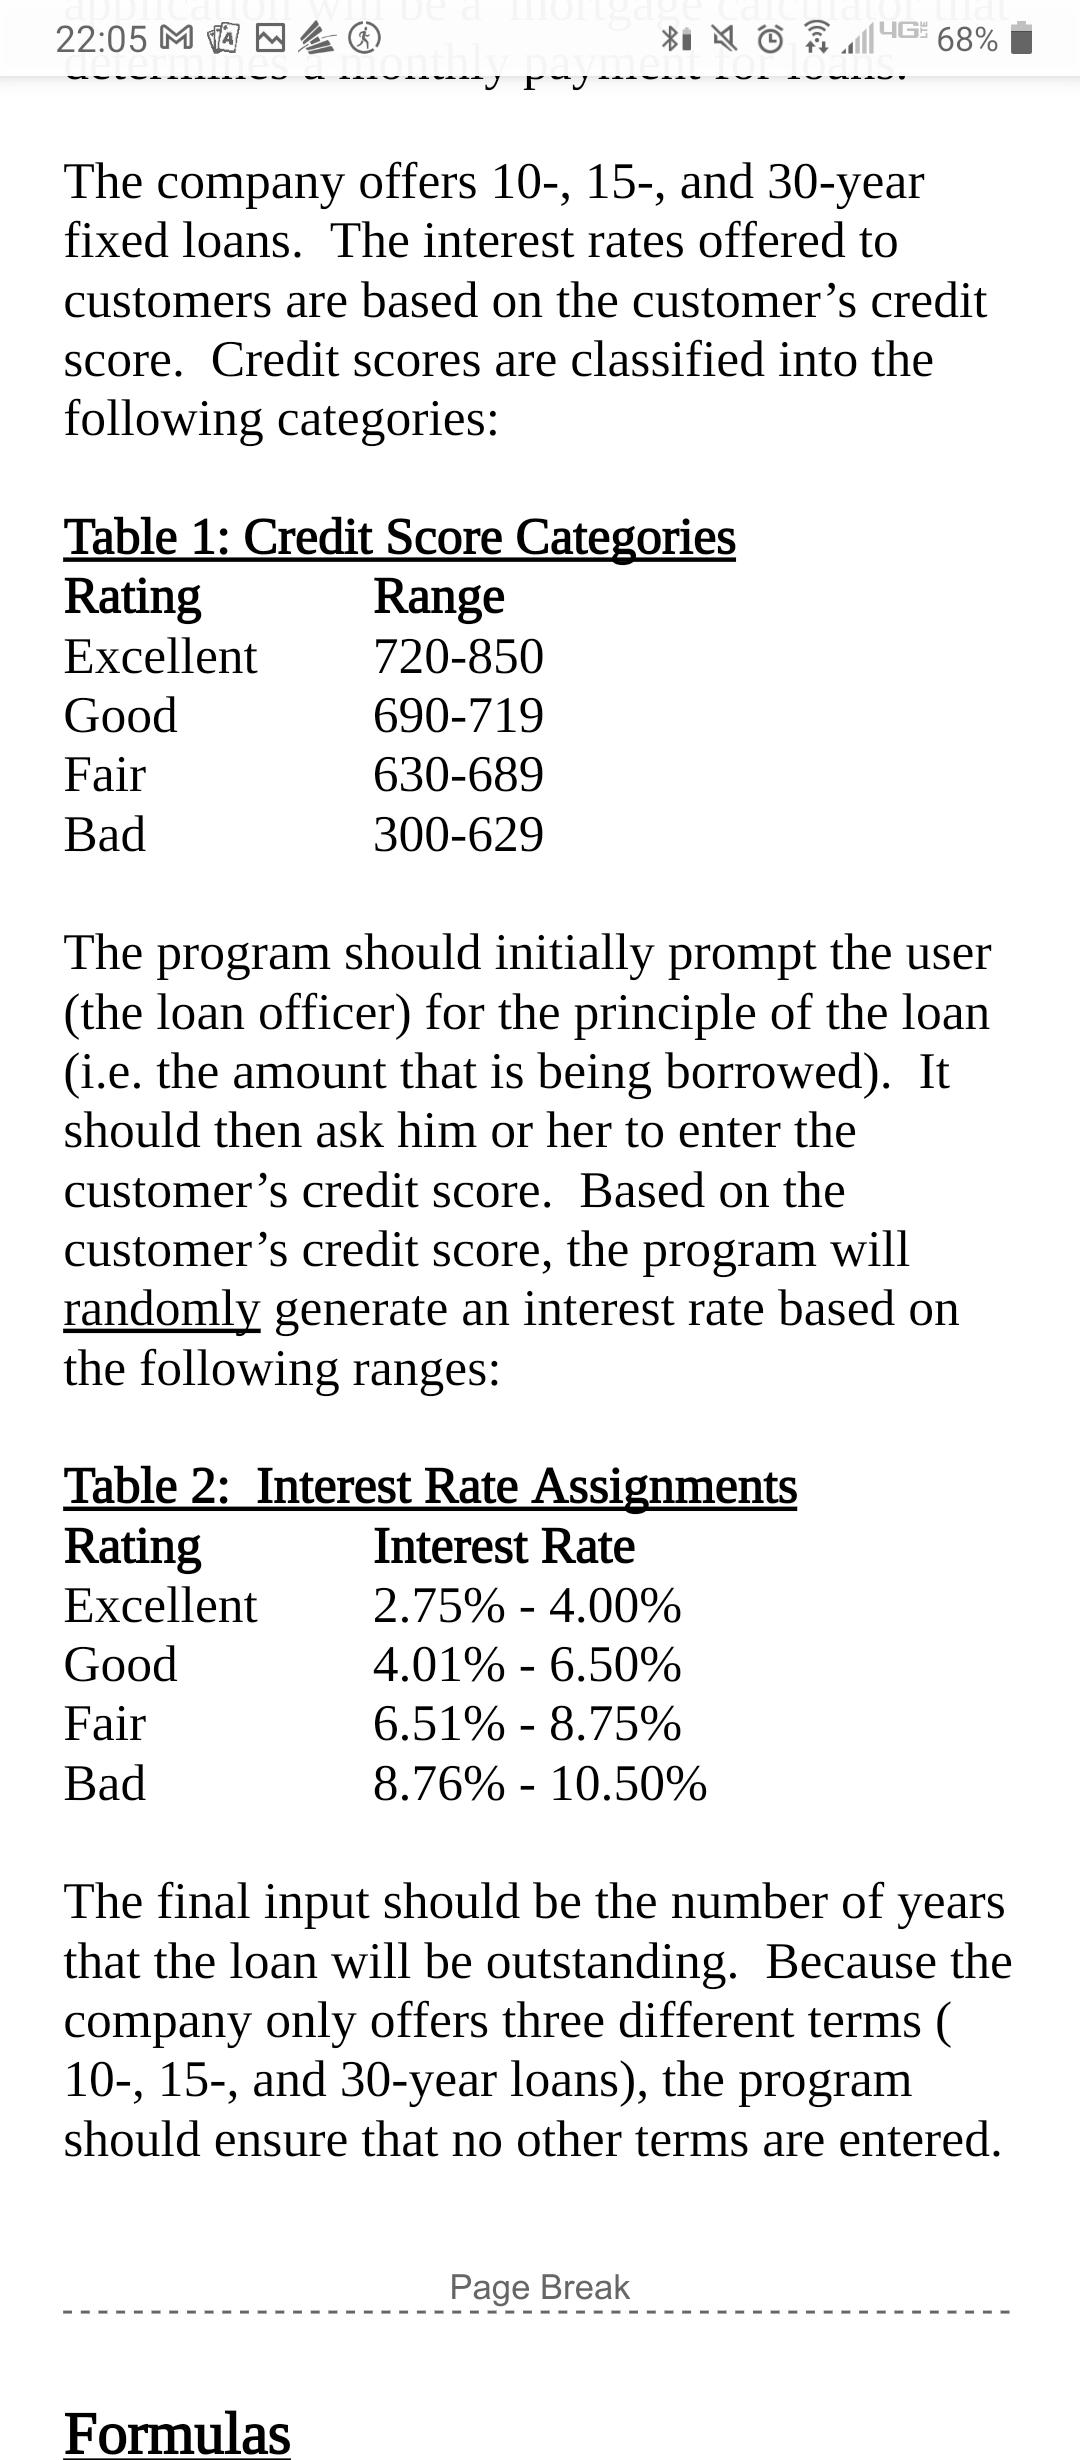 22:05 M
|YG
68%
The company offers 10-, 15-, and 30-year
fixed loans. The interest rates offered to
customers are based on the customer's credit
Score. Credit scores are classified into the
following categories:
Table 1: Credit Score Categories
Rating
Range
Excellent
720-850
Good
690-719
Fair
630-689
Bad
300-629
The program should initially prompt the user
(the loan officer) for the principle of the loan
(i.e. the amount that is being borrowed). It
should then ask him or her to enter the
customer's credit score. Based on the
customer's credit score, the program will
randomly generate an interest rate based on
the following ranges:
Table 2: Interest Rate Assignments
Rating
Excellent
Interest Rate
2.75% - 4.00%
Good
4.01% - 6.50%
Fair
6.51% - 8.75%
Bad
8.76% - 10.50%
The final input should be the number of years
that the loan will be outstanding. Because the
company only offers three different terms (
10-, 15-, and 30-year loans), the program
should ensure that no other terms are entered.
Page Break
Formulas
